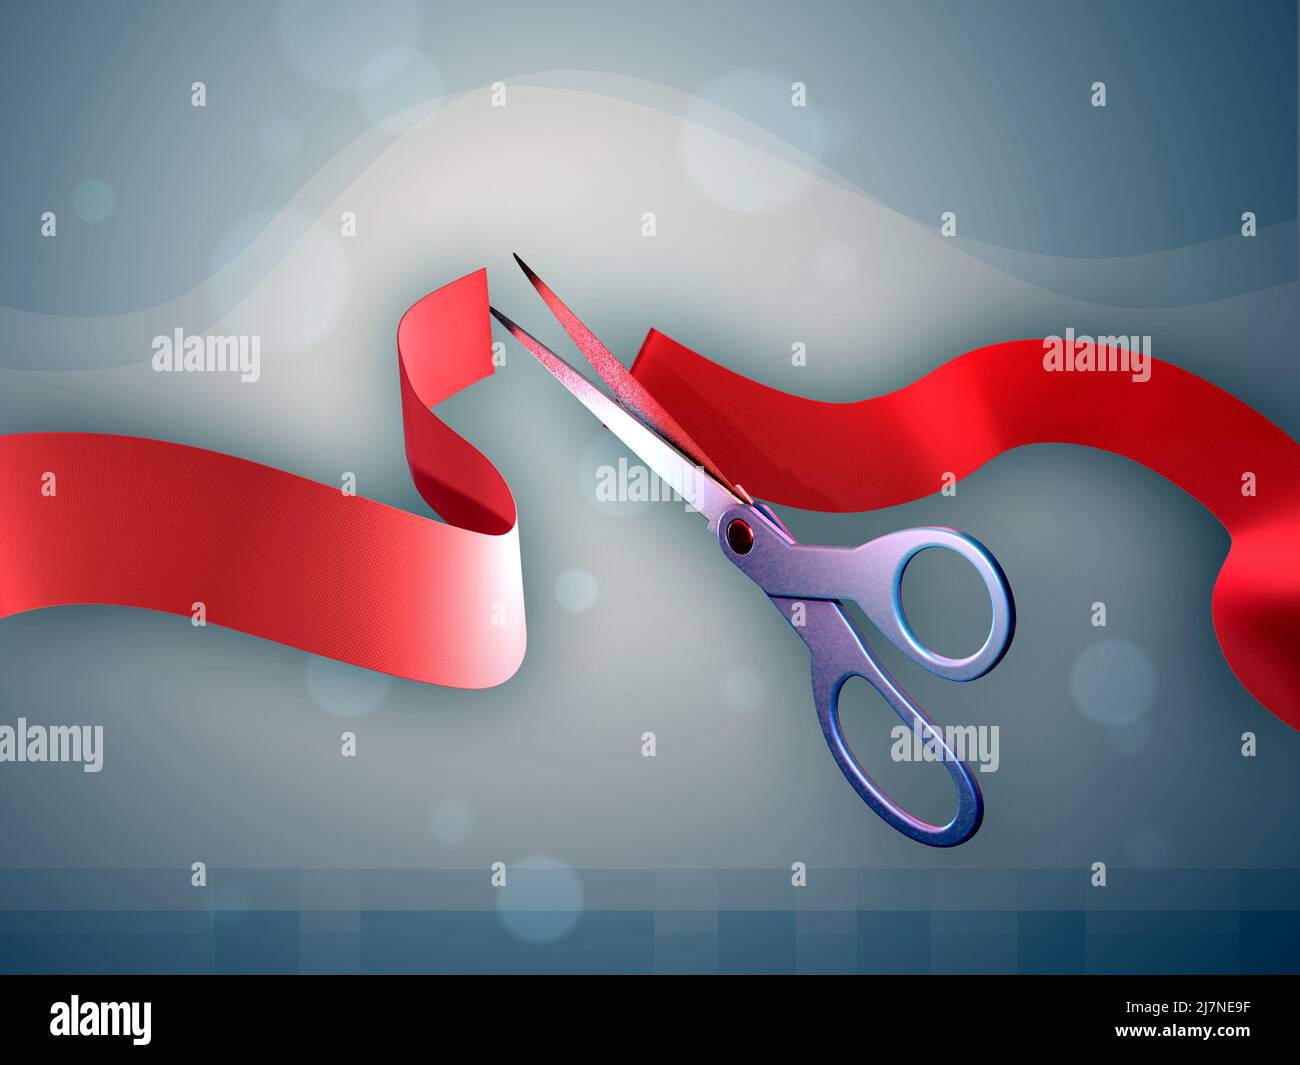 Scissors cutting a red ribbon for an inauguration ceremony. Digital illustration. Stock Photo